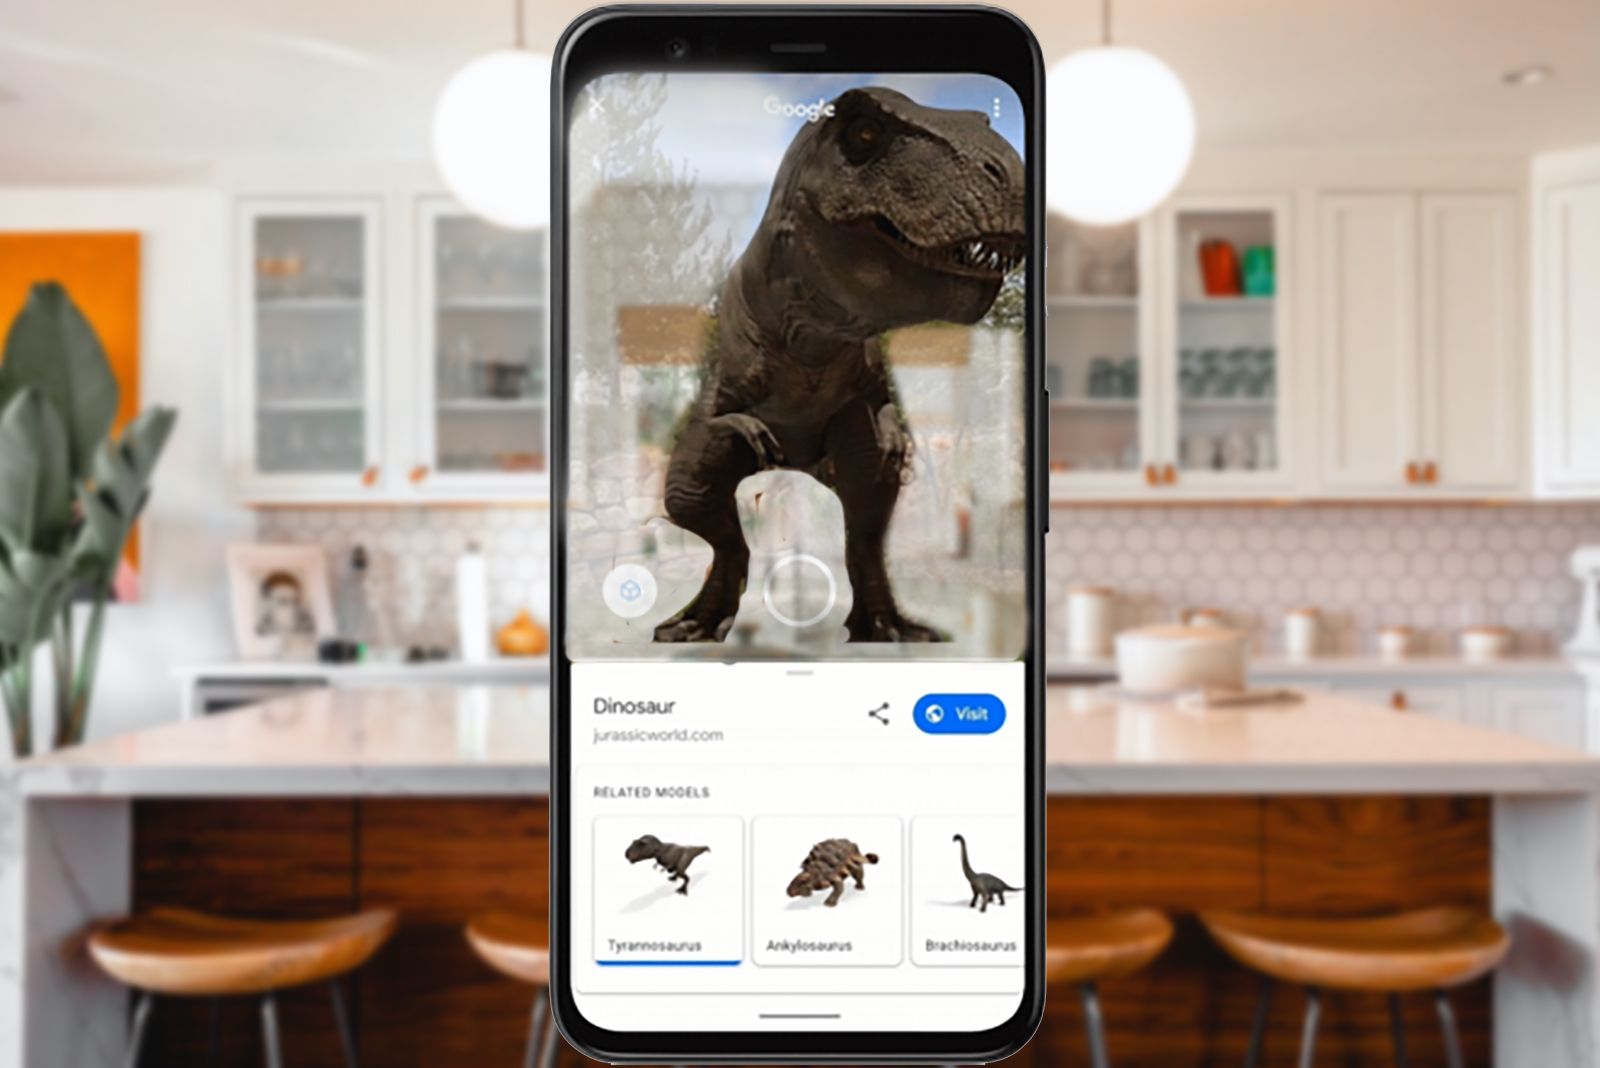 How to View Google 3D Animals in Your Mobile \ AR Feature 